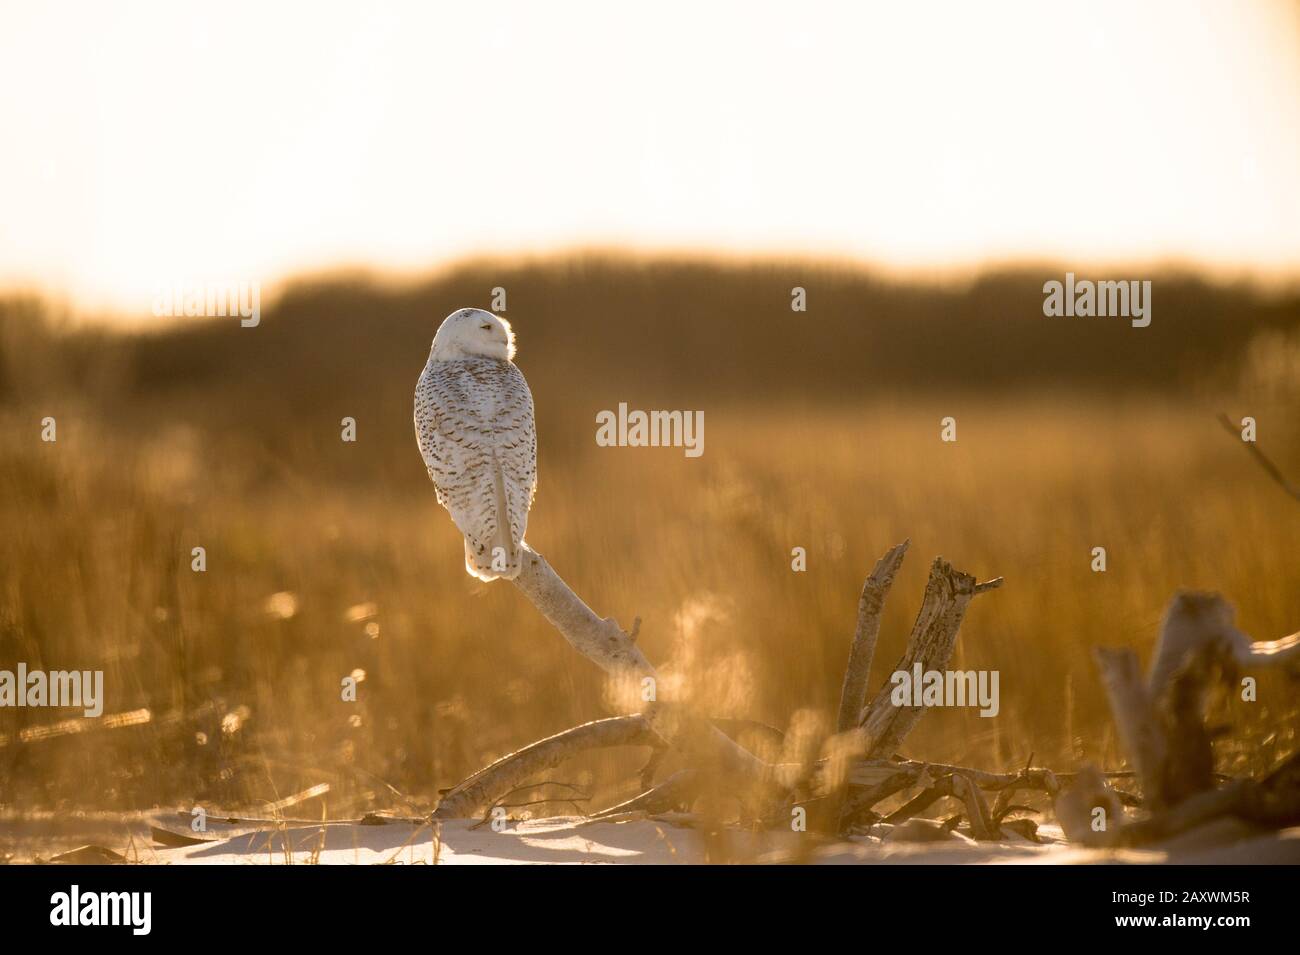 A Snowy Owl perched on driftwood glows in the bright winter sun with brown and golden dune grass in the background. Stock Photo